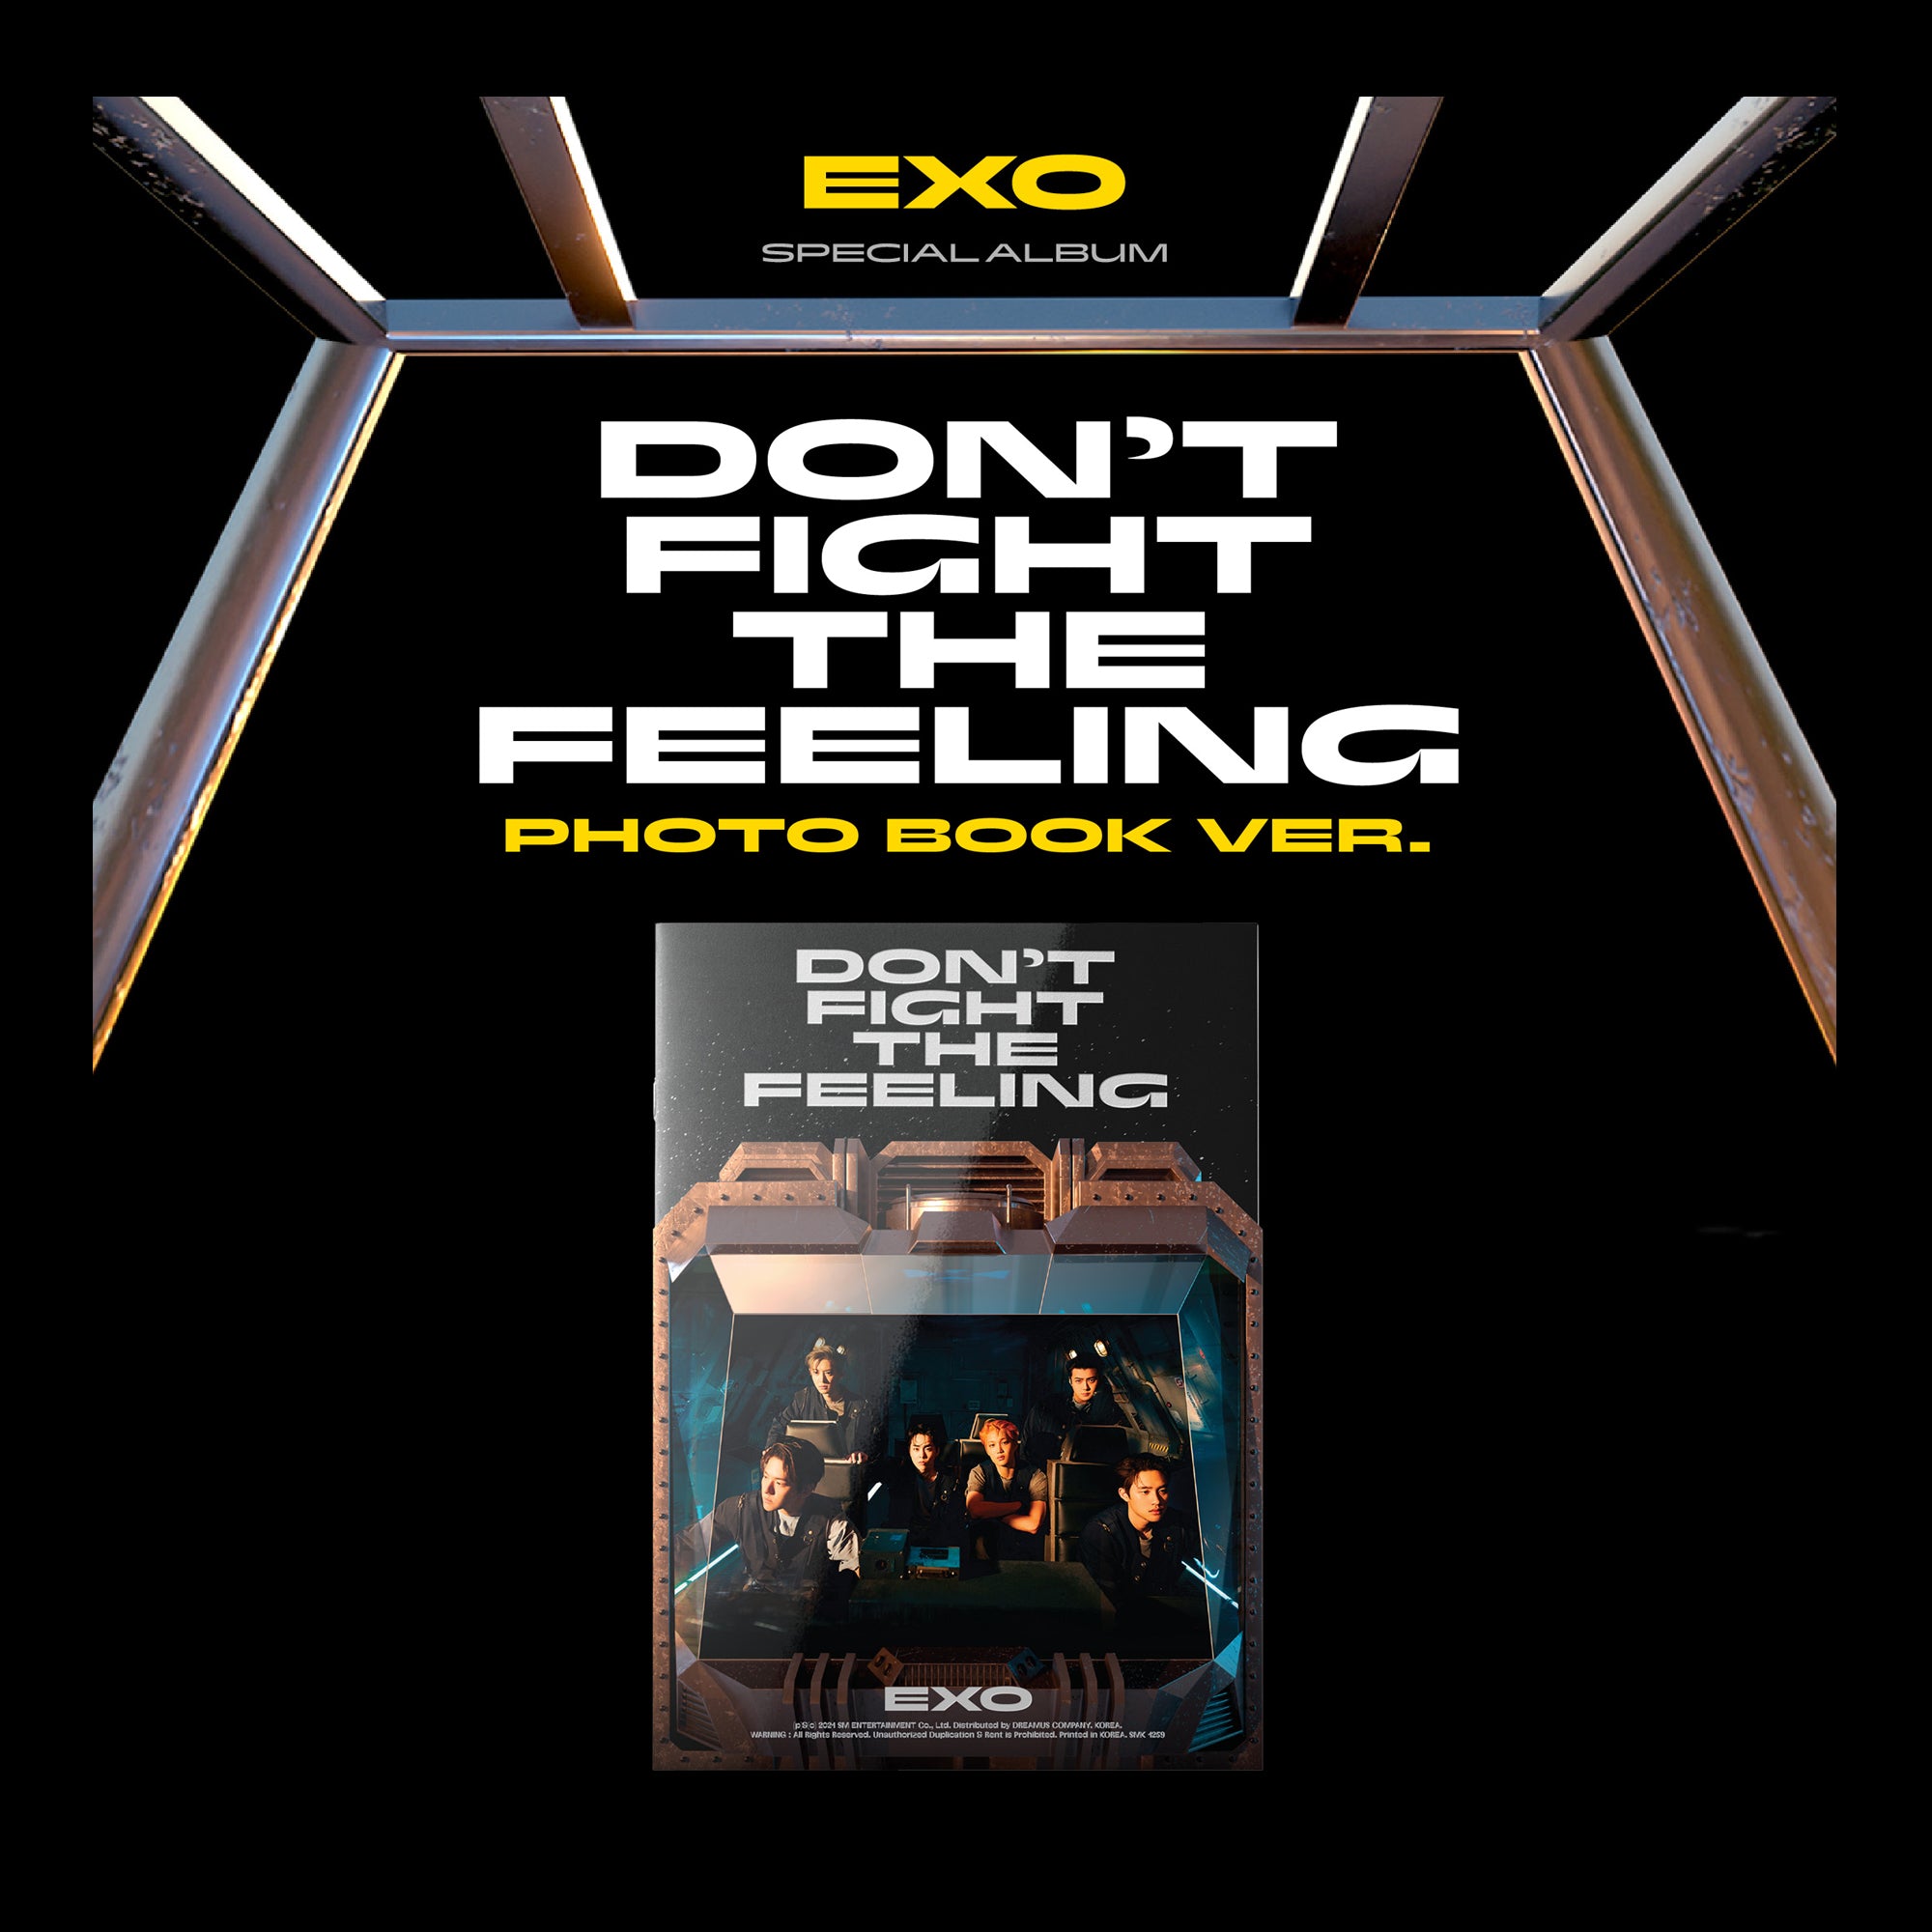 EXO - Don't fight the feeling (Photo book Ver.)